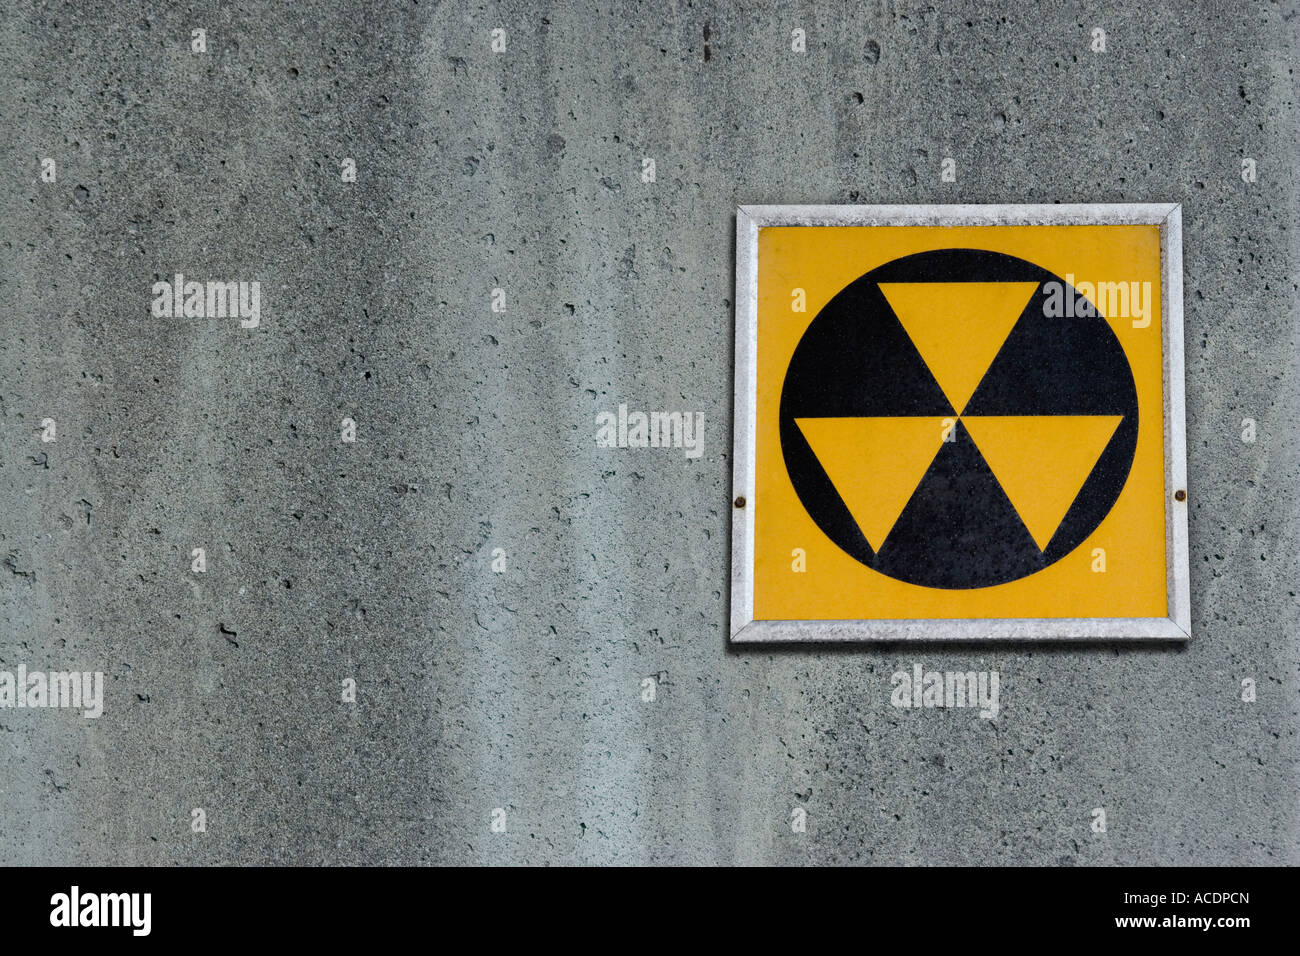 Radiation fallout shelter sign on concrete wall Stock Photo